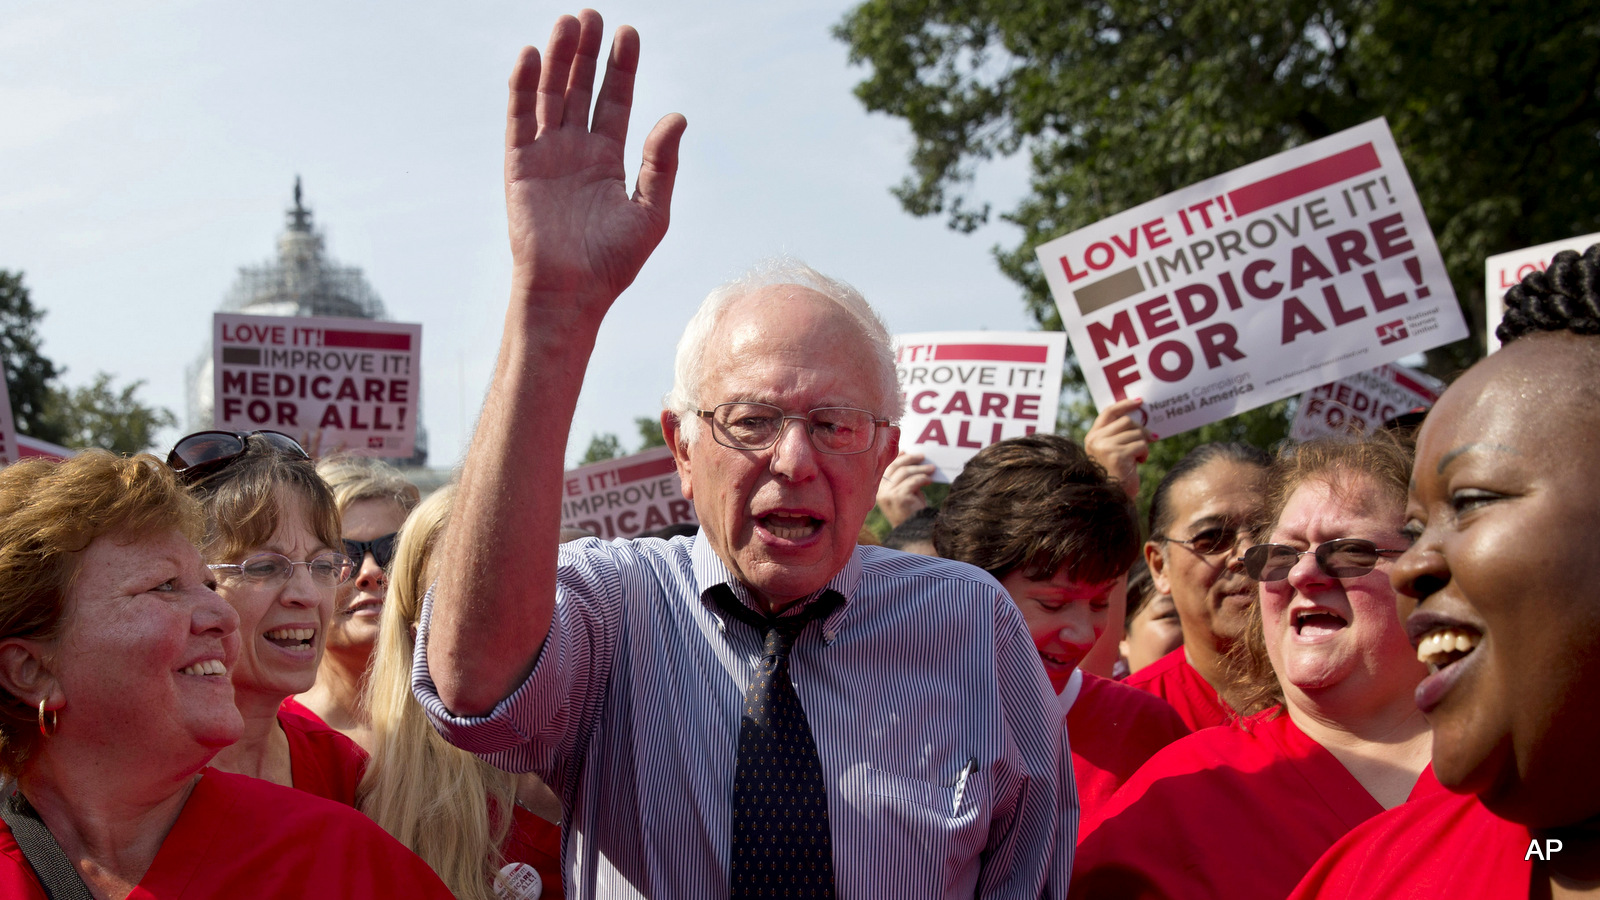 Sen. Bernie Sanders, I-Vt., waves after speaking at a rally with registered nurses and other community leaders celebrate the 50th anniversary of Medicare and Medicaid, on Capitol Hill Washington.